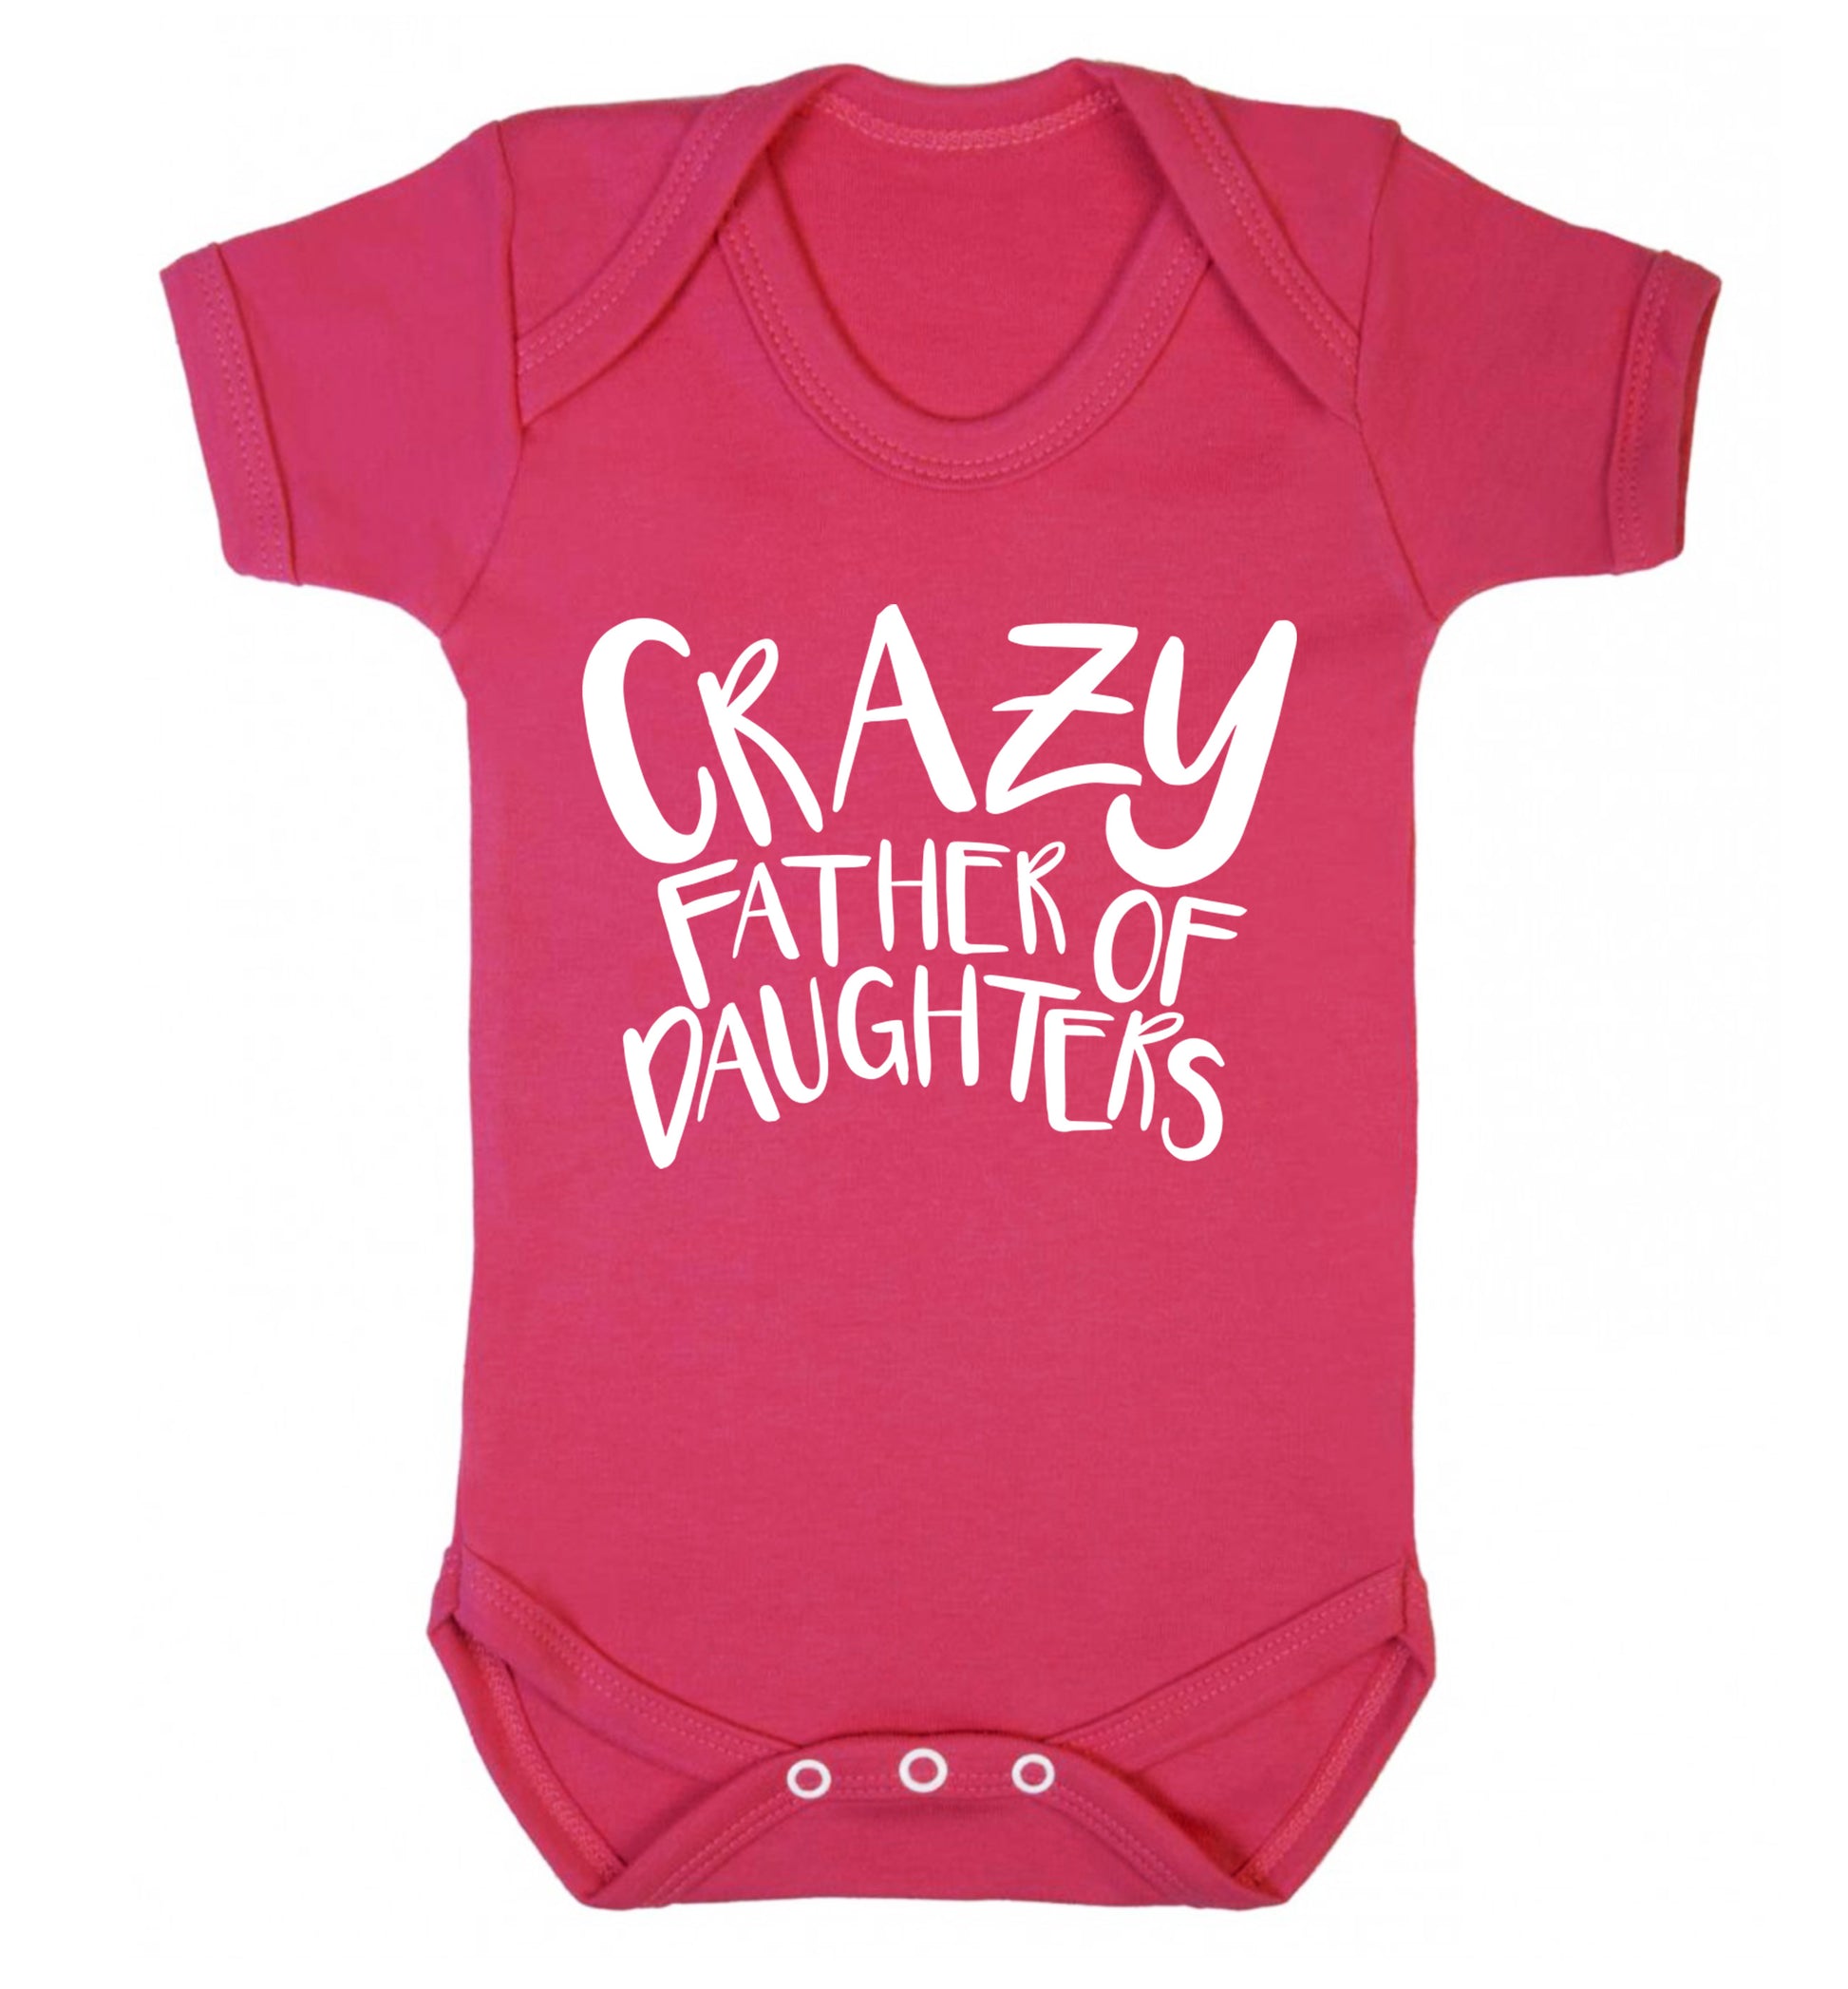 Crazy father of daughters Baby Vest dark pink 18-24 months